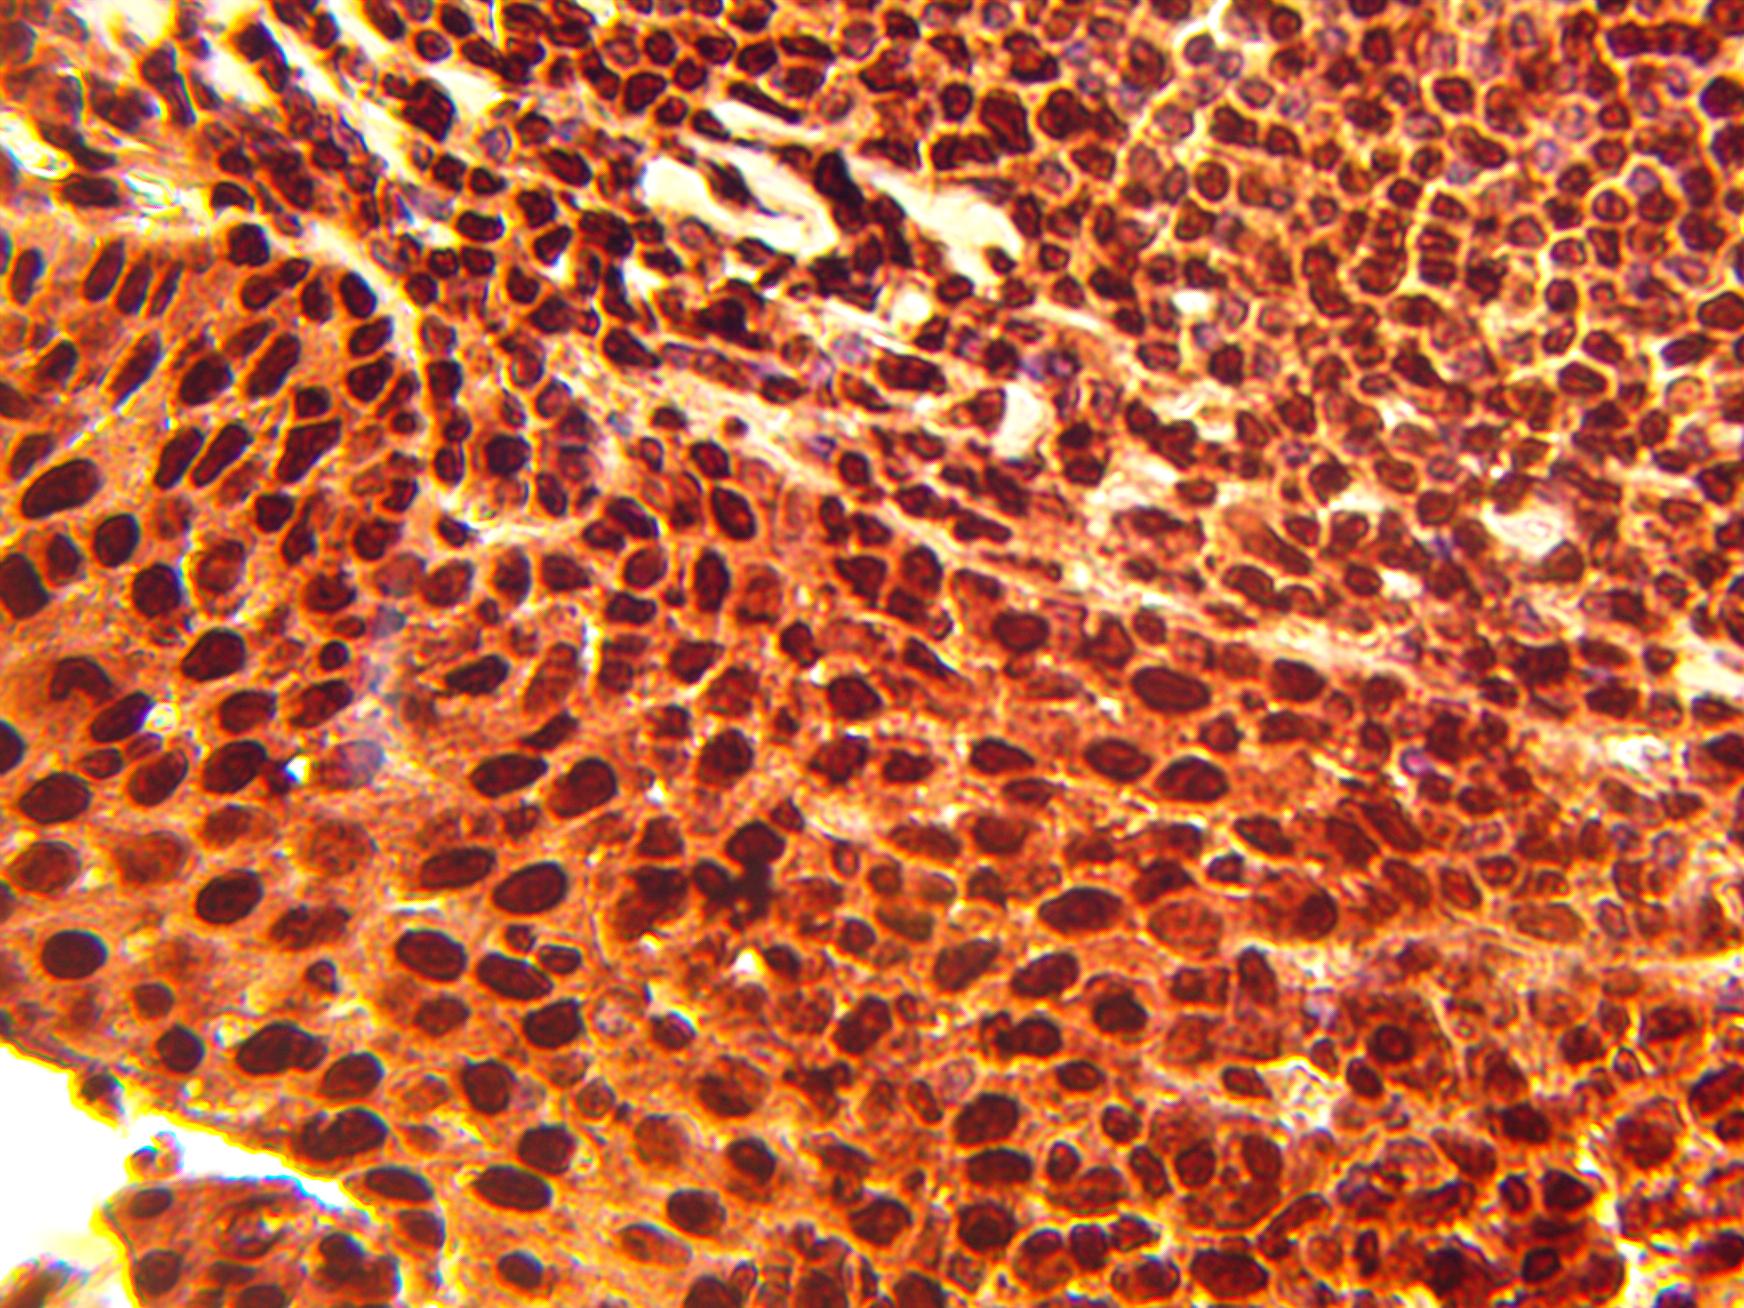 Immunohistochemical staining of normal human tonsil tissue using TOP1 antibody (Cat. No. X2732P) at 10 µg/ml and detected using anti-Rabbit HRP secondary antibody and visualized using DAB substrate and hematoxylin counterstain.